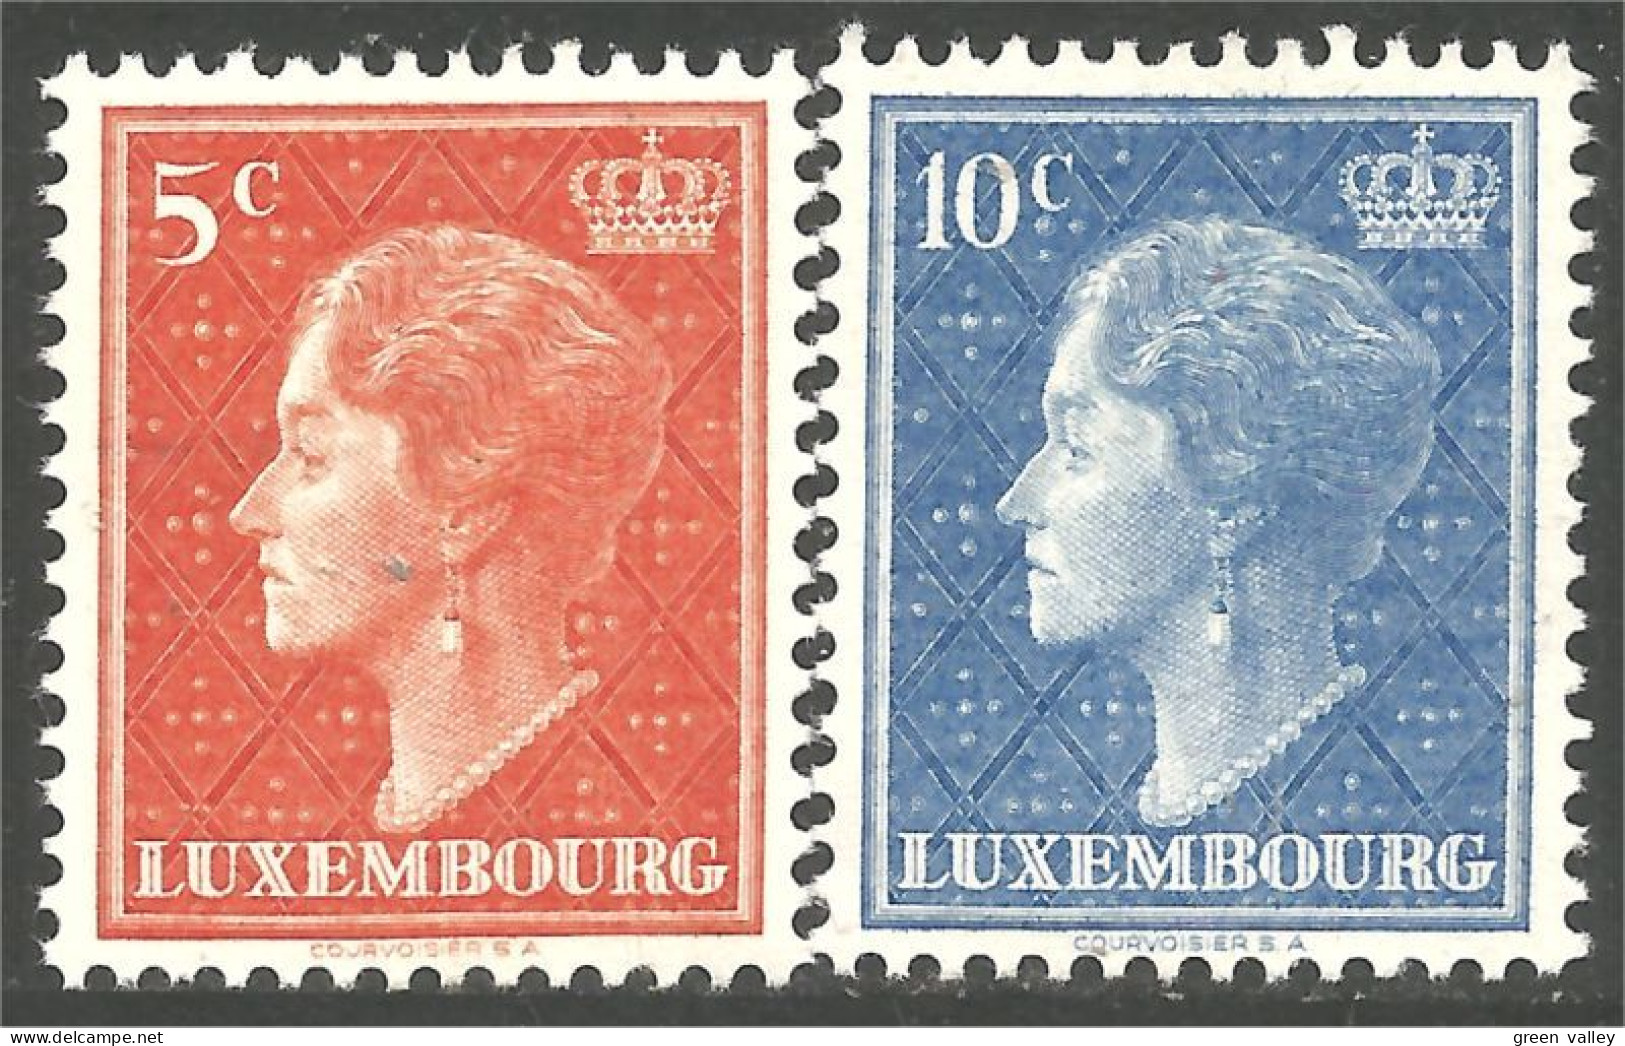 584 Luxembourg 1944 Grand Duchesse Charlotte MH * Neuf (LUX-144) - 1944 Charlotte Rechtsprofil